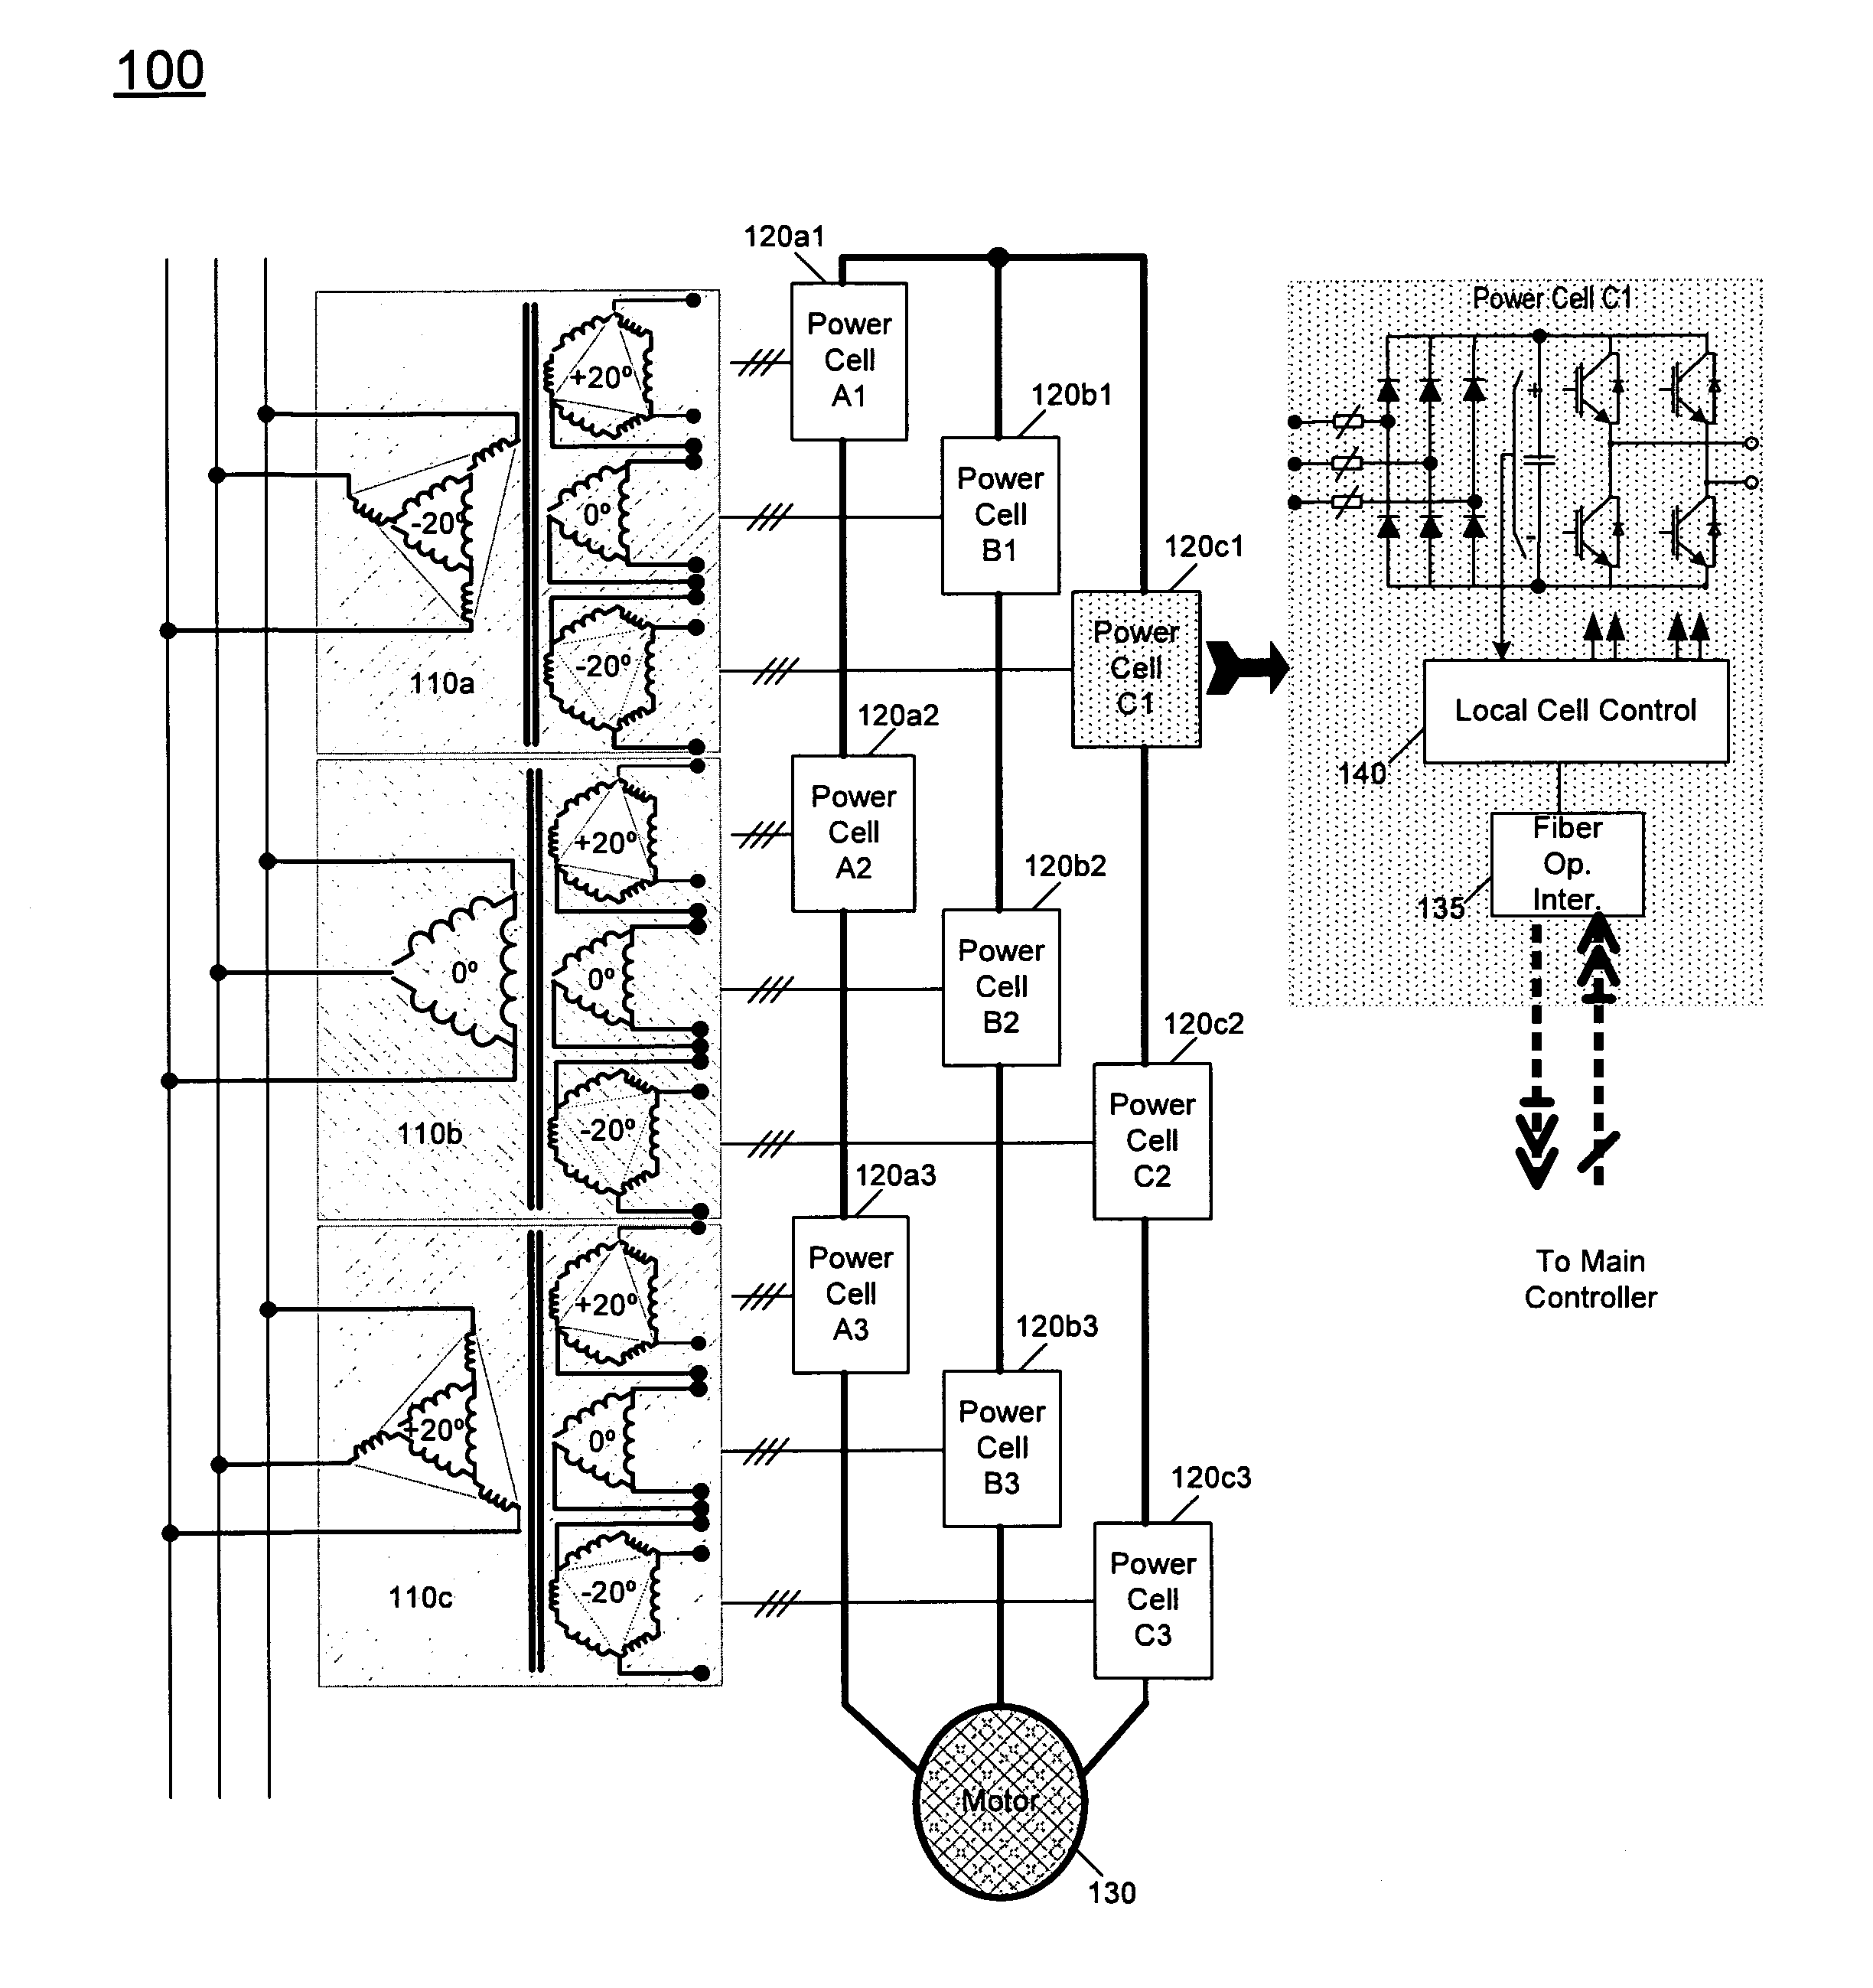 Pre-charging an inverter using an auxiliary winding